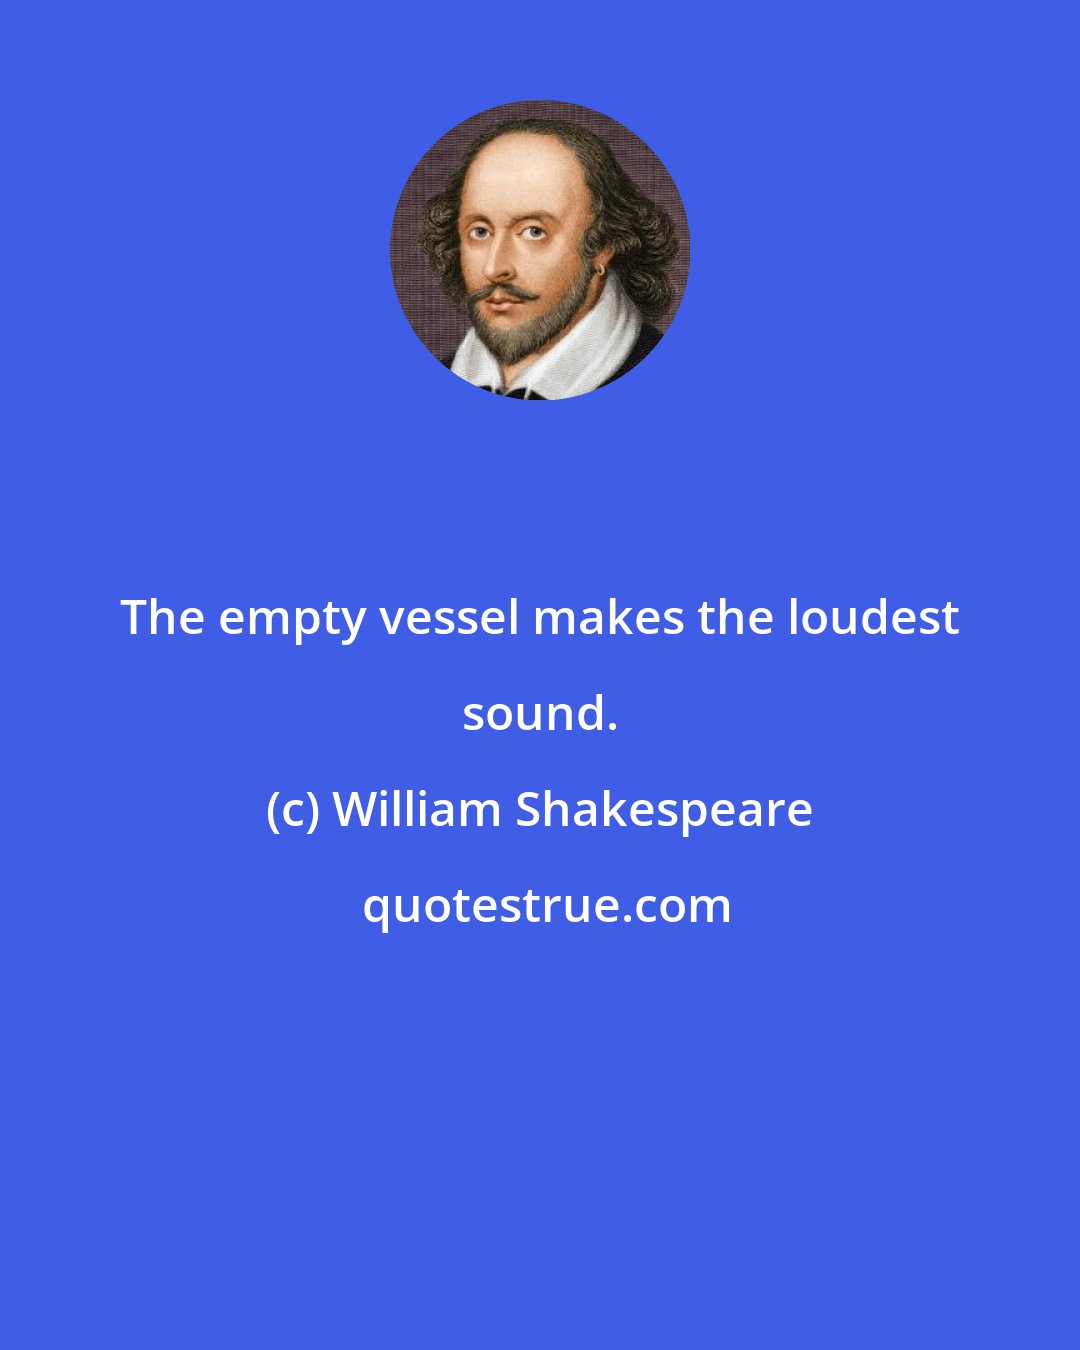 William Shakespeare: The empty vessel makes the loudest sound.